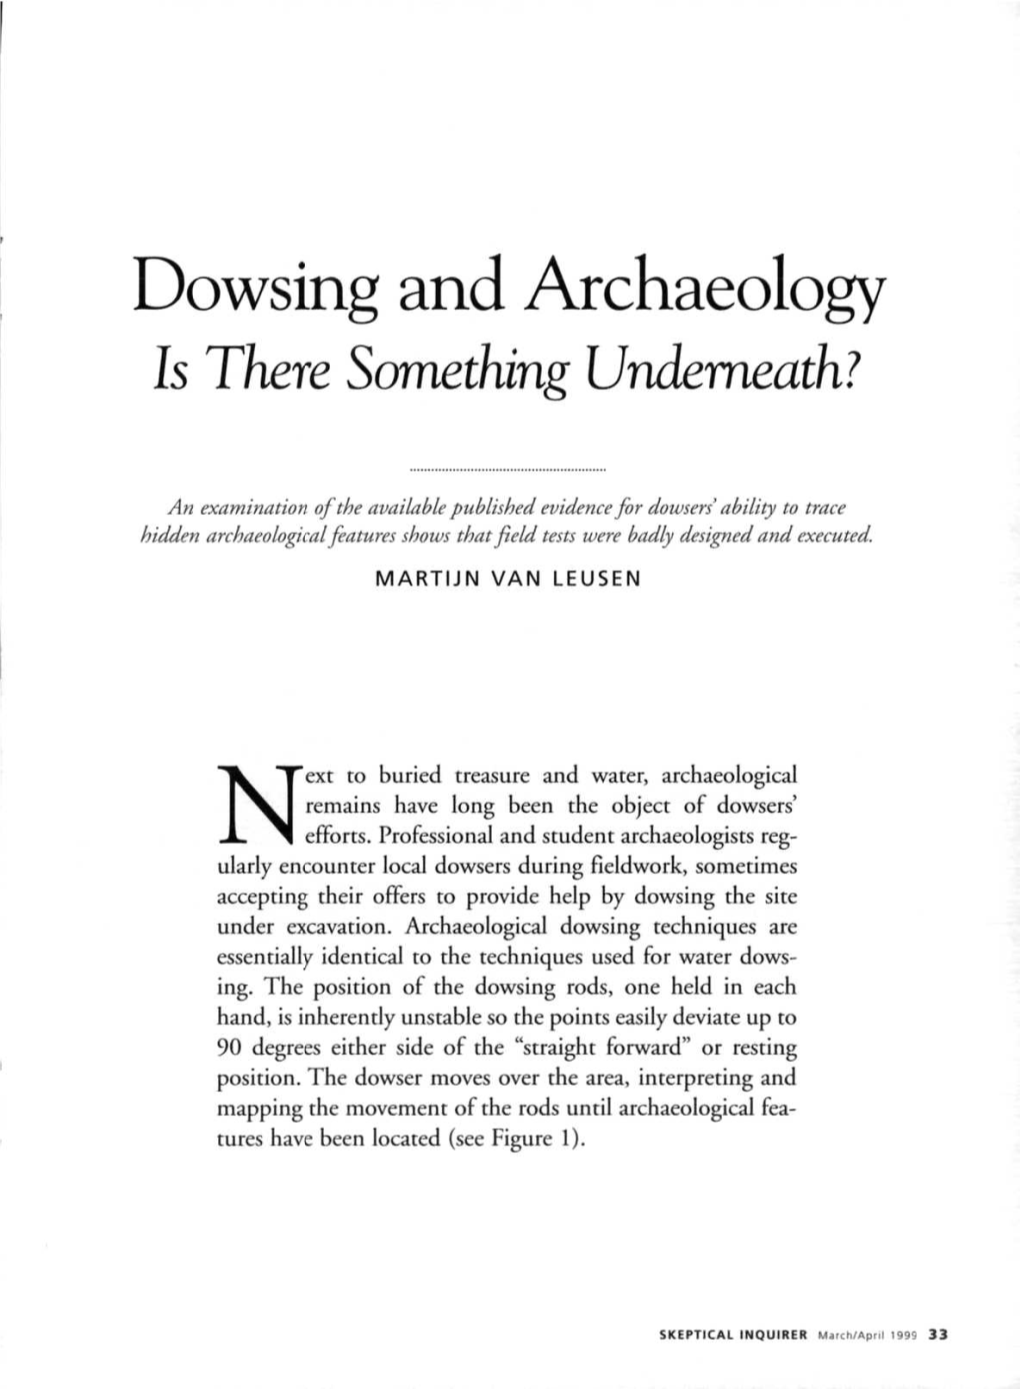 Dowsing and Archaeology Is There Something Underneath?